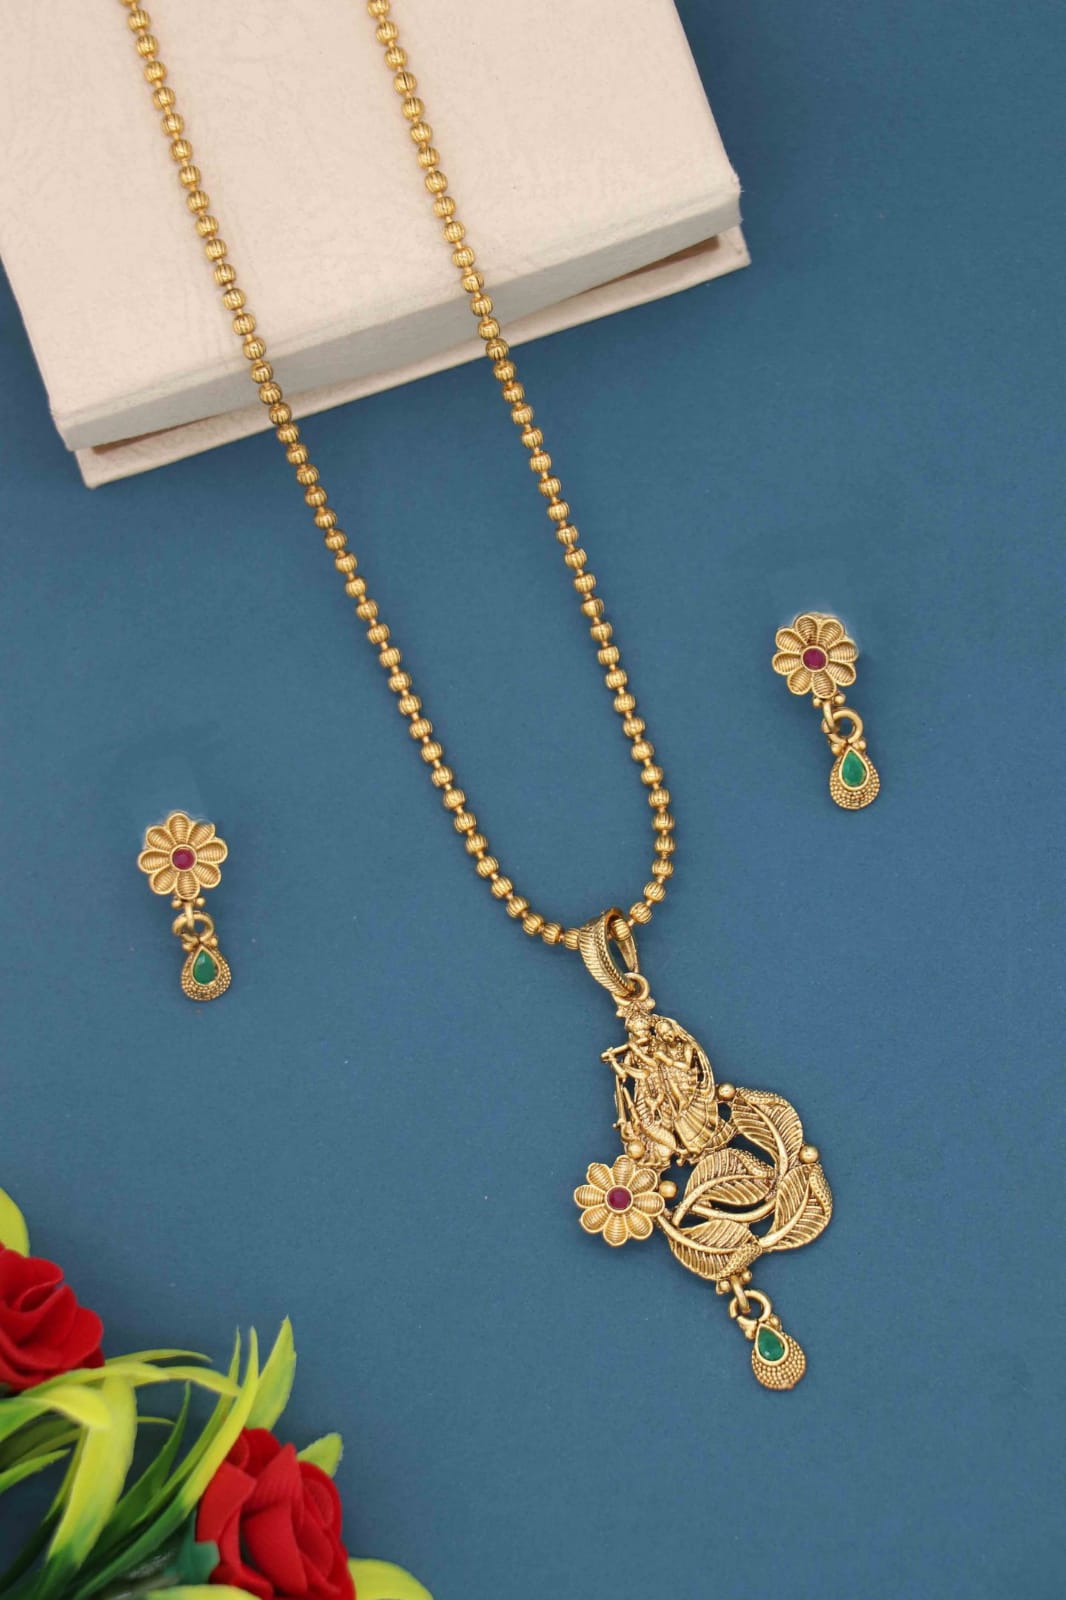 Gold Plated Floral Design Pendant Chain and Earring Set – Gifts and Fashion